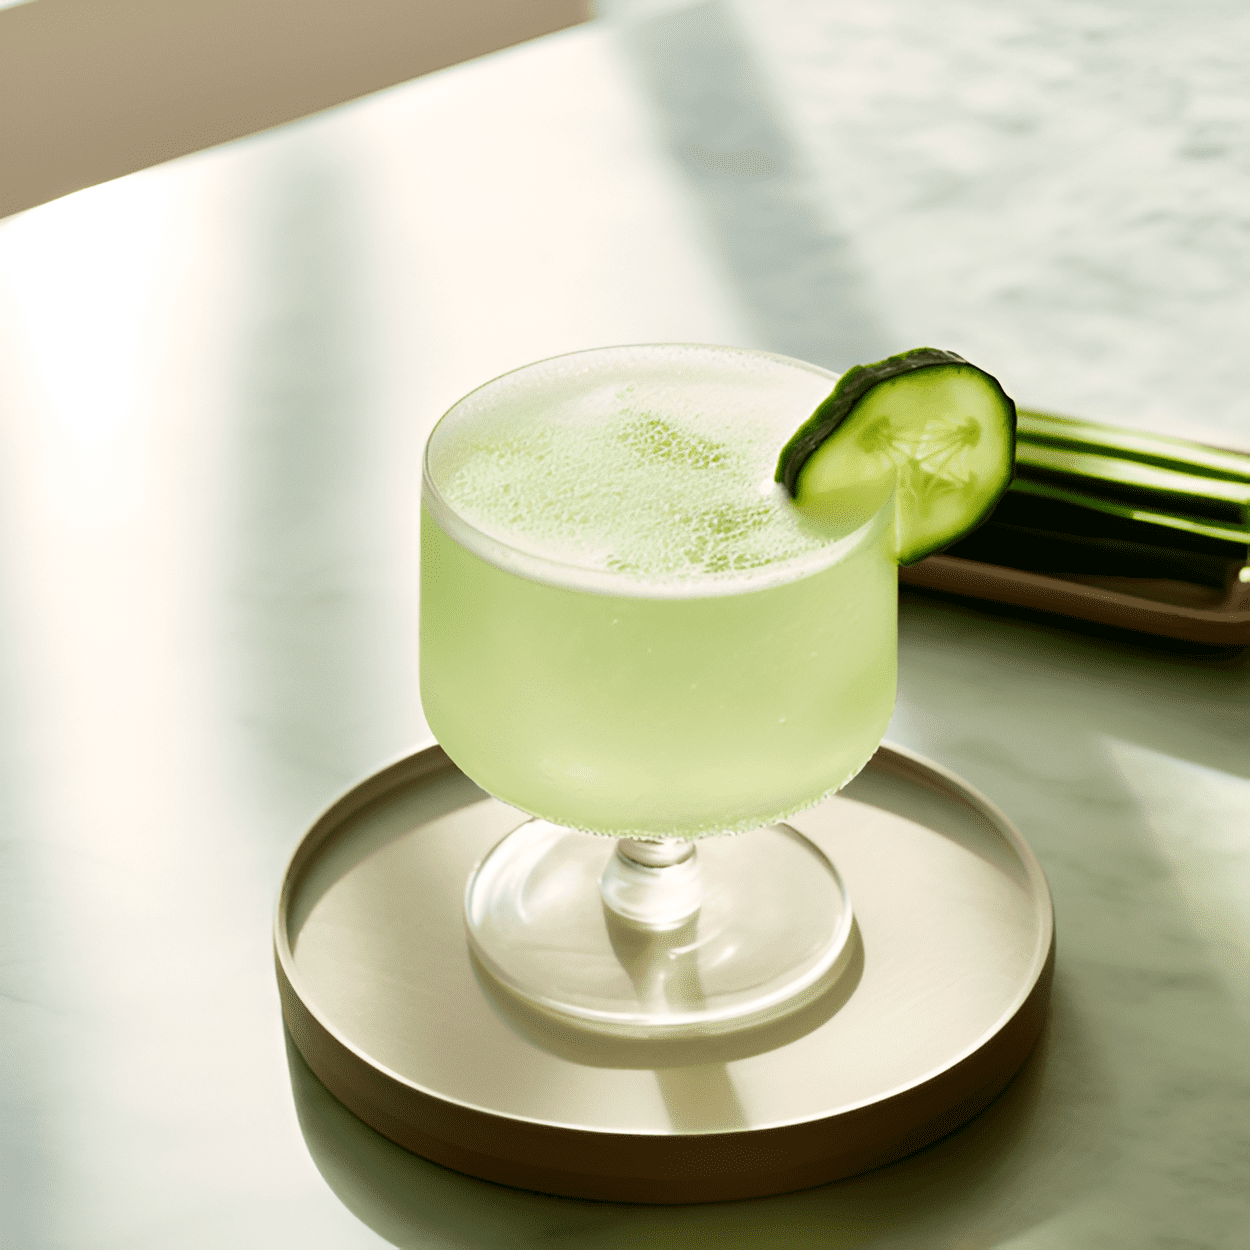 Screaming Viking Cocktail Recipe - The Screaming Viking has a unique, refreshing taste. It's a blend of sweet and sour, with the cucumber adding a crisp freshness. The gin gives it a strong, robust flavor, while the lime juice adds a tangy kick.